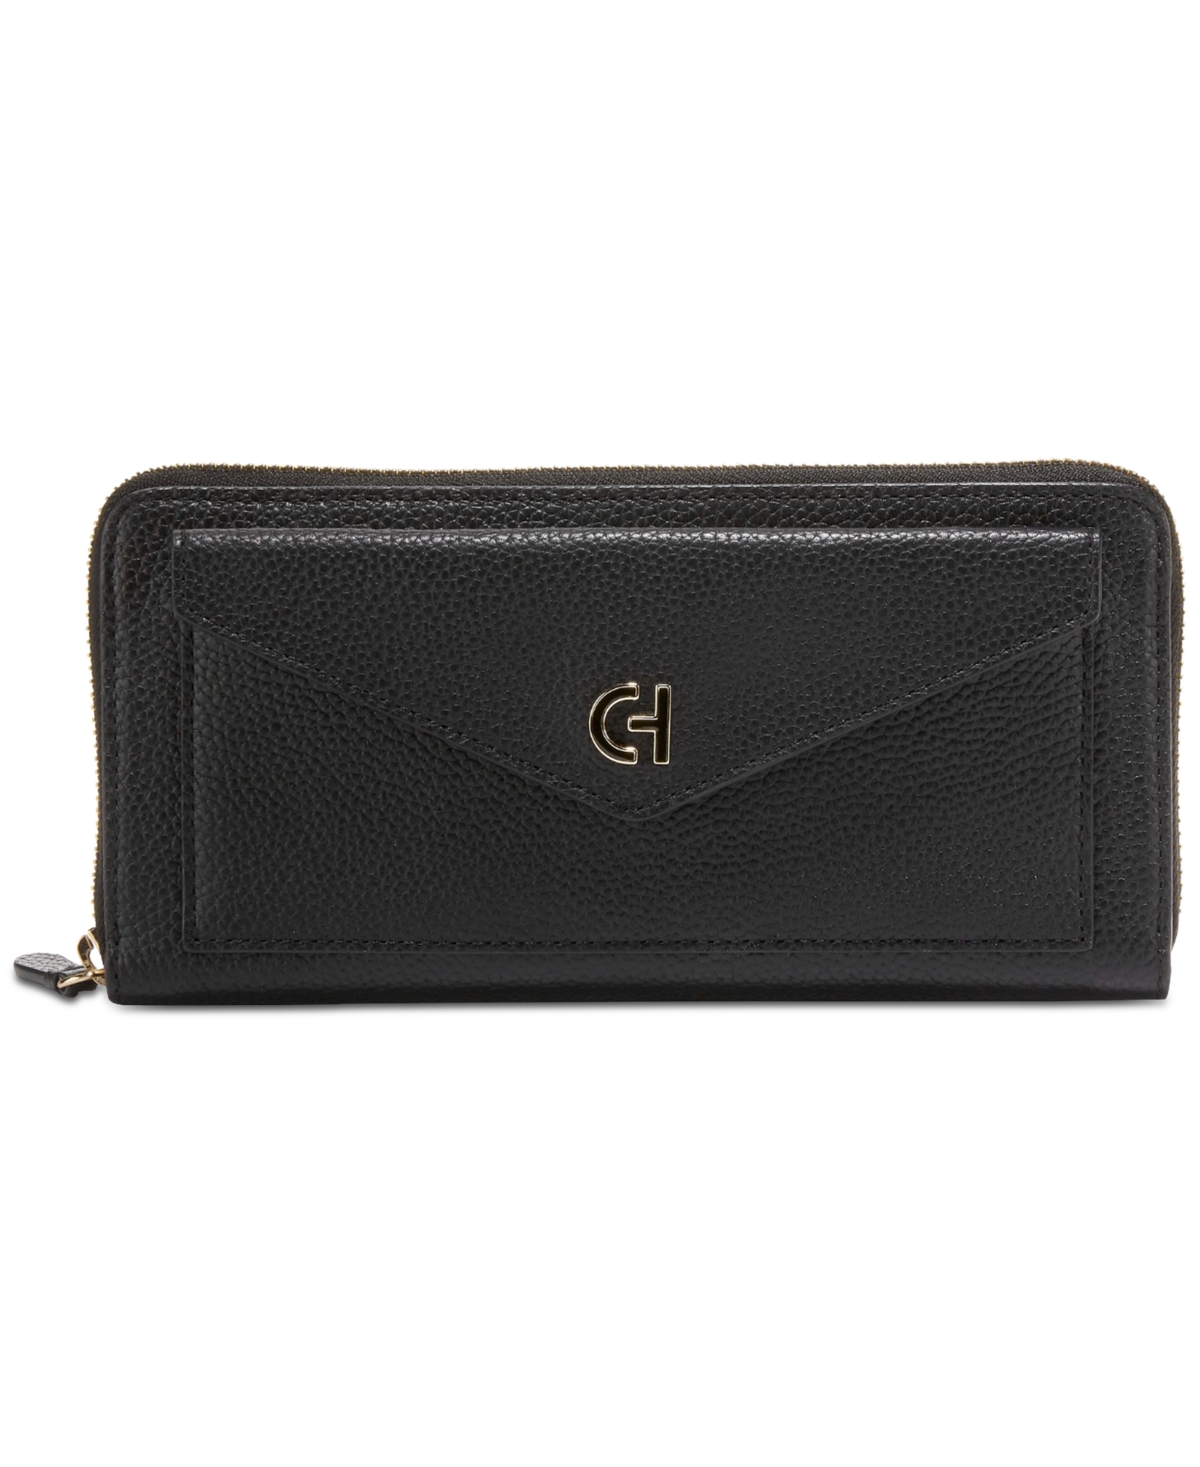 Cole Haan Women's Town Continental Leather Wallet